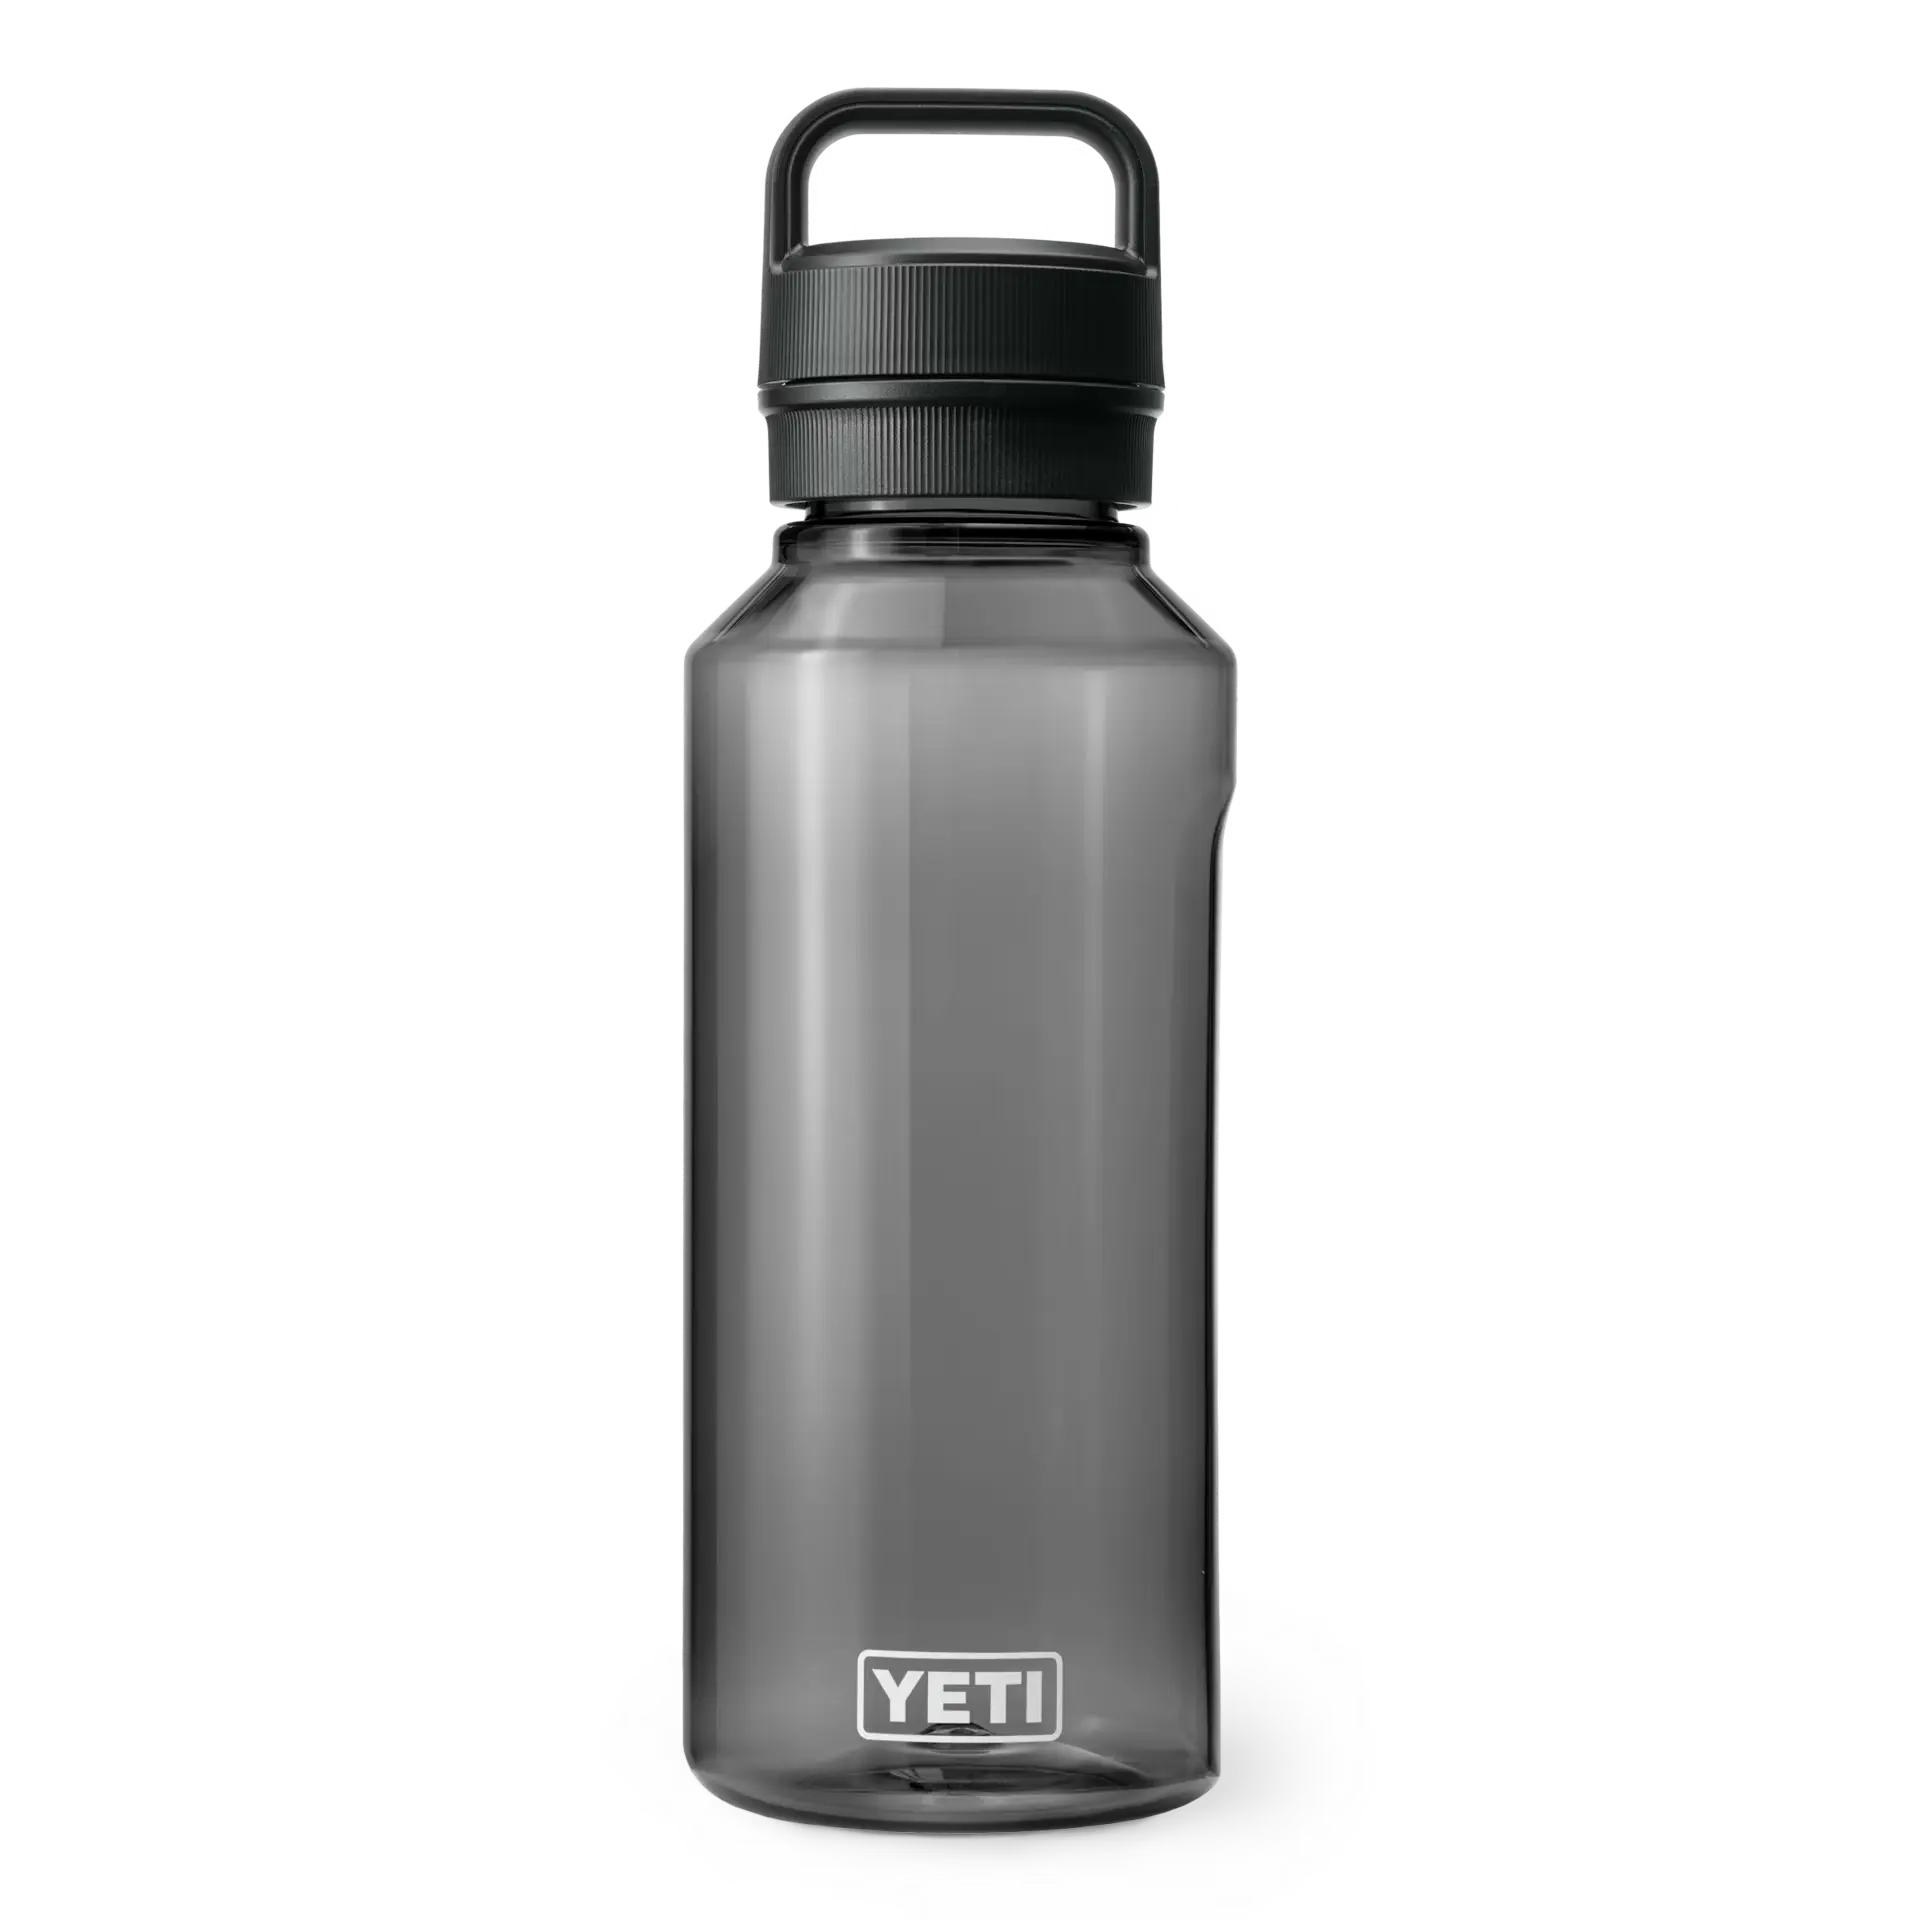 A YETI Yonder Bottle in Charcoal.